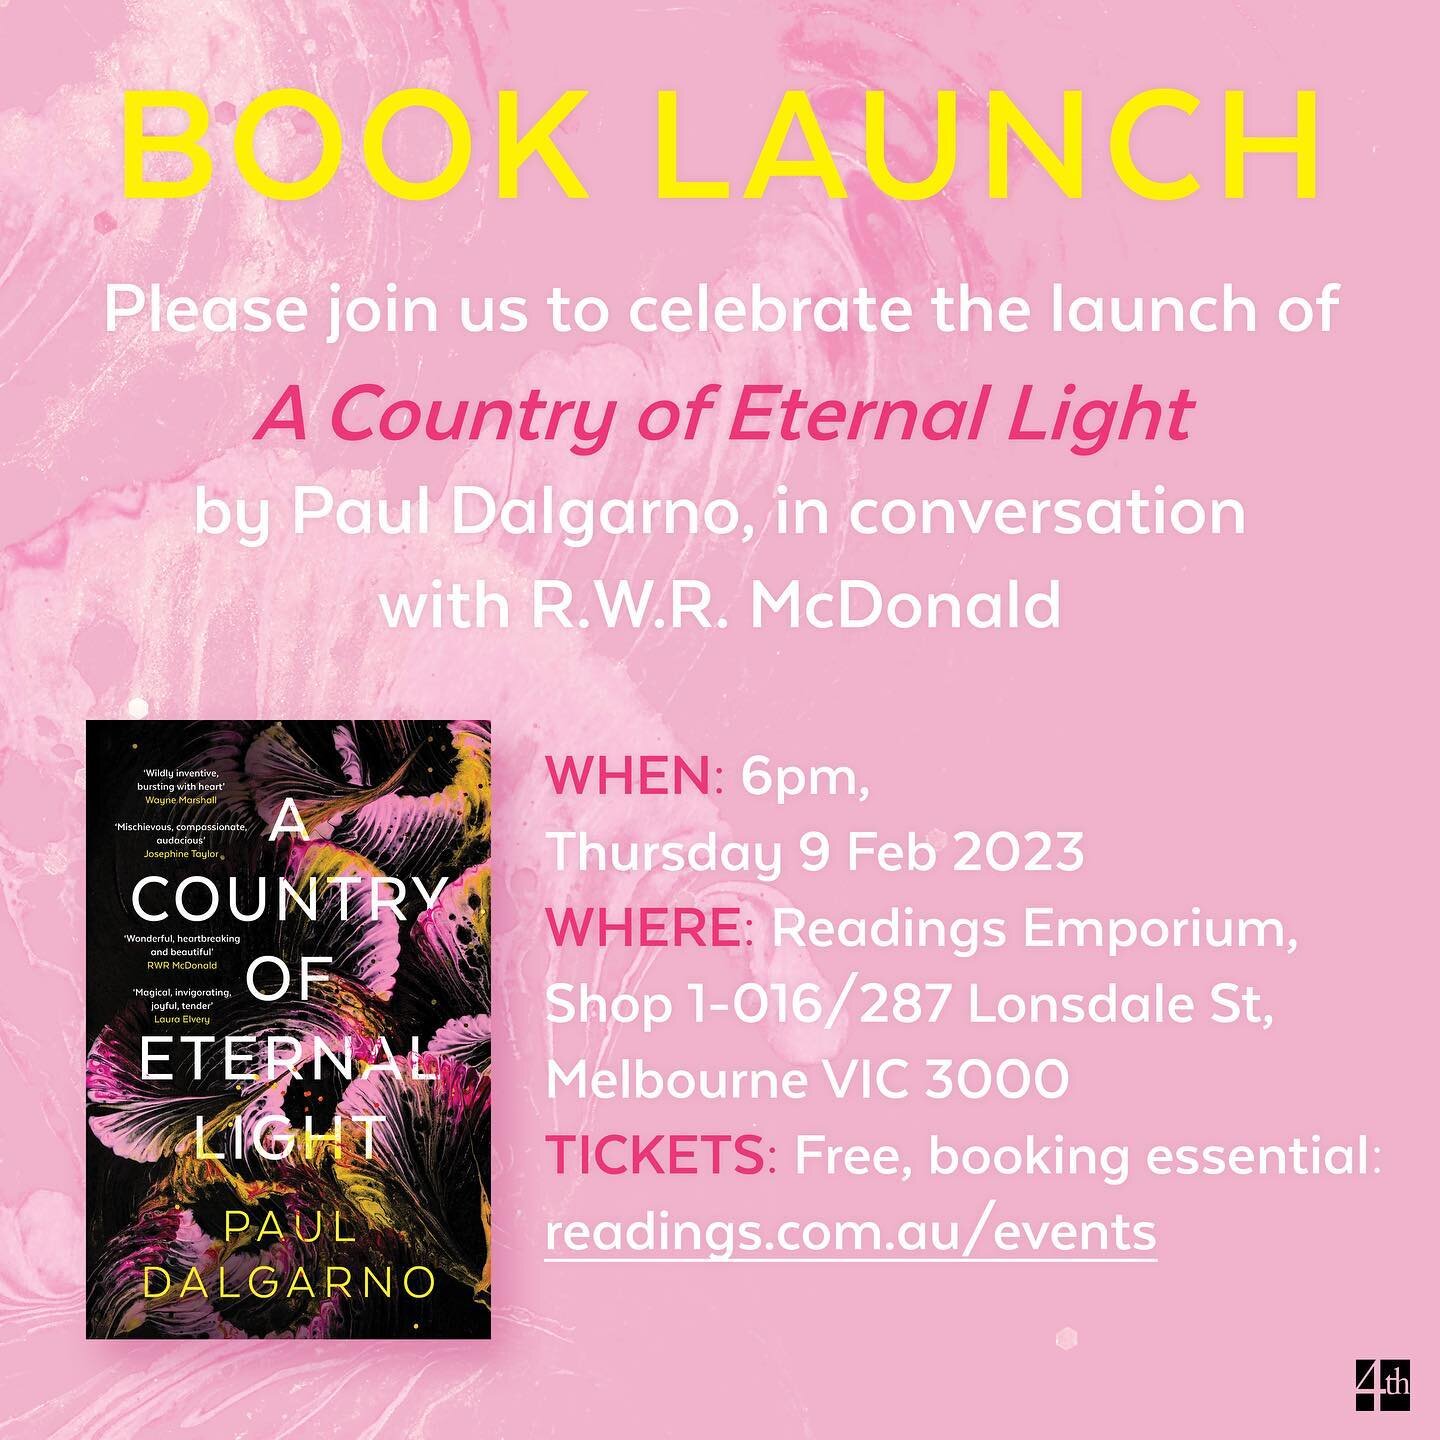 So &hellip; I&rsquo;ll be launching my novel, A Country of Eternal Light, on Thurs 9 February at the Readings Emporium in Melbourne, with none other than RWR McDonald.

I&rsquo;d love it if you could come along, and bring any friends or family who mi